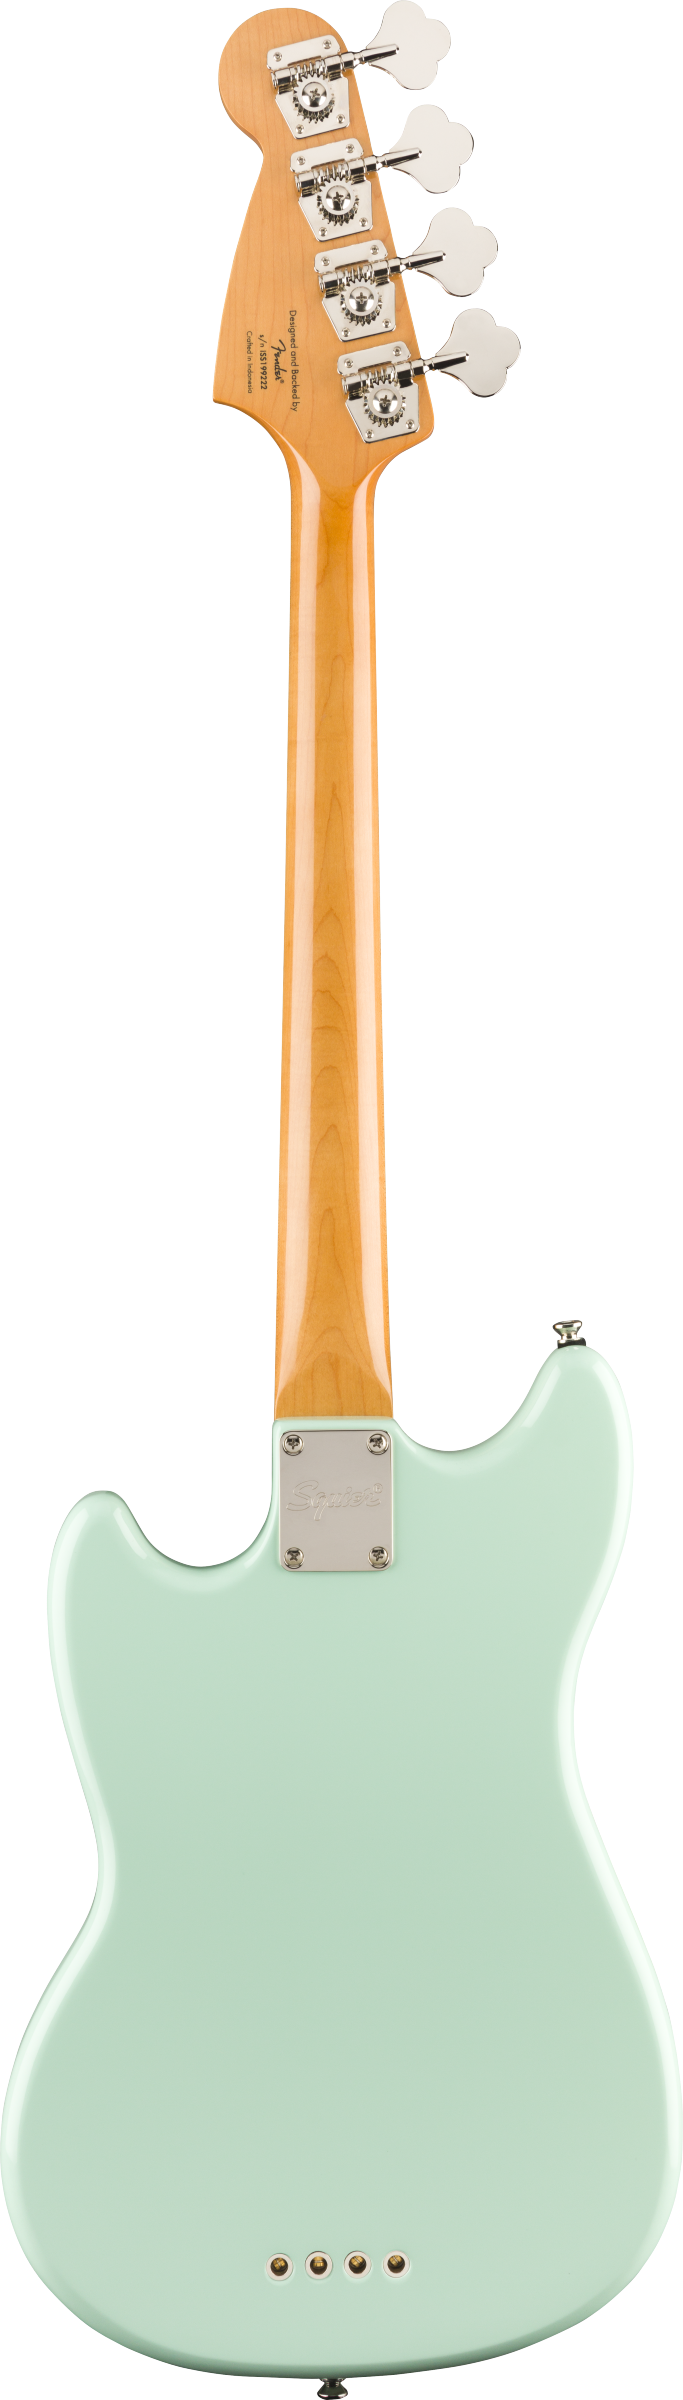 Squier Classic Vibe '60s Mustang Bass Surf Green